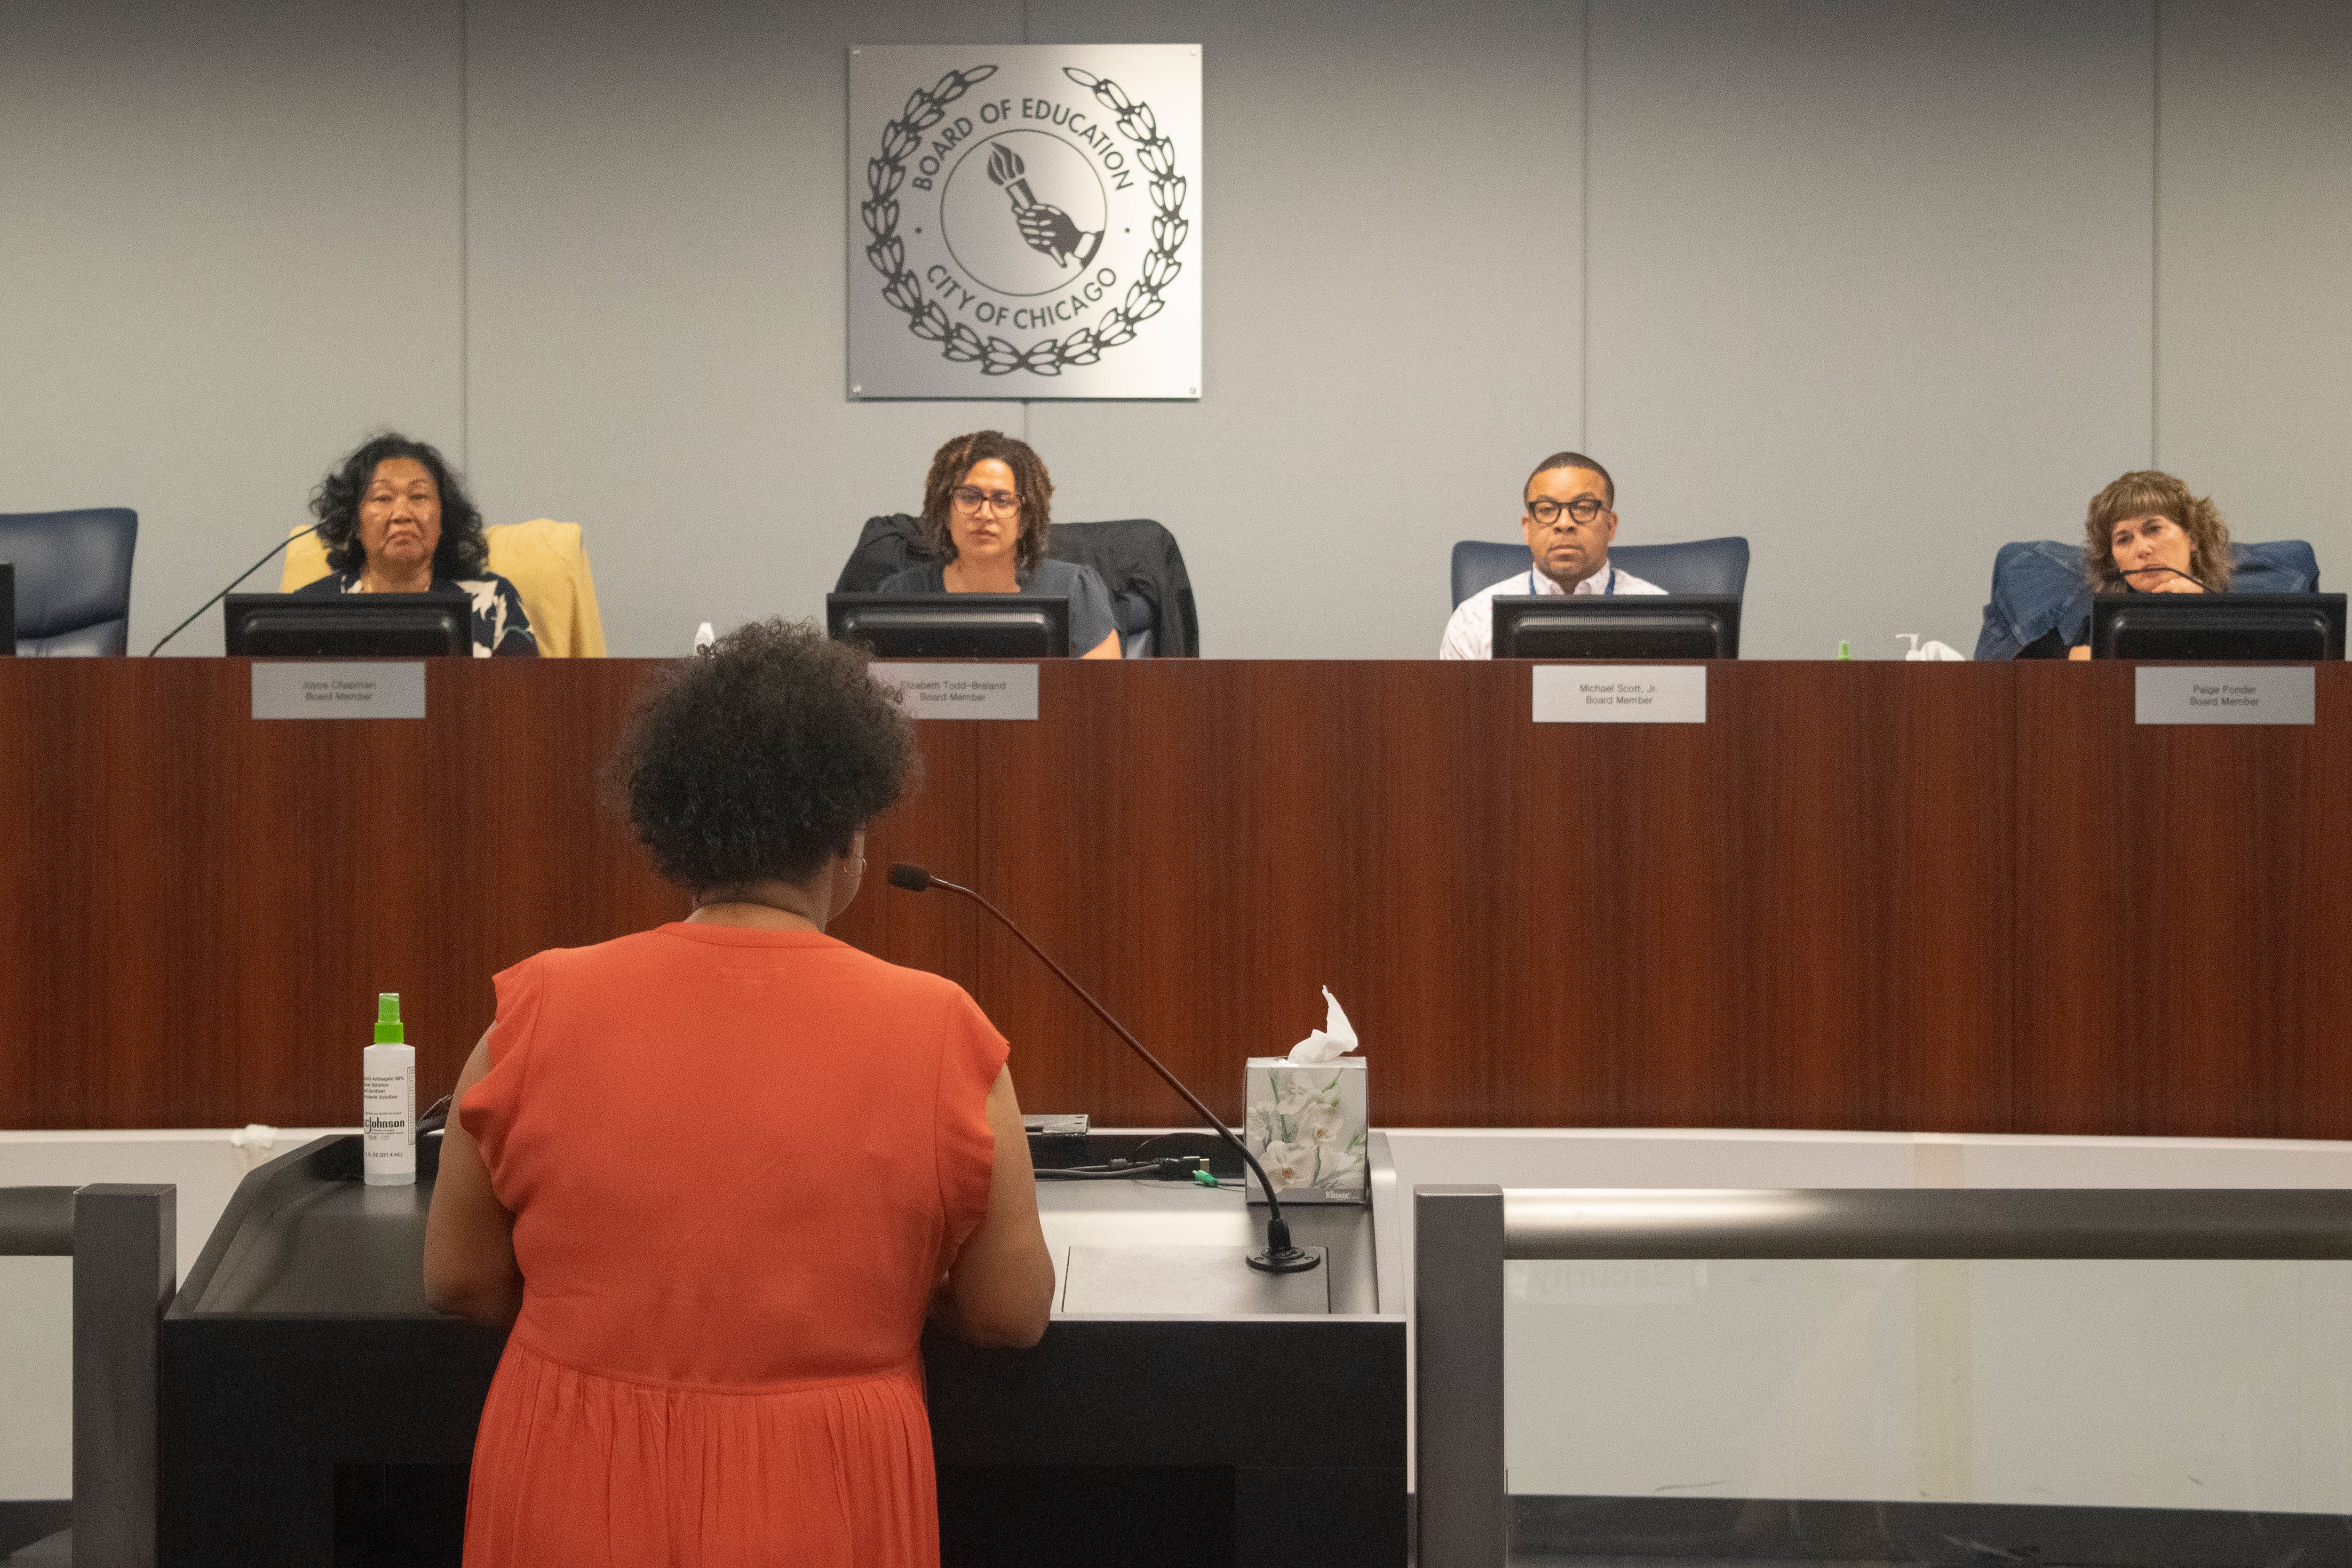 A woman speaks at a lectern at a Chicago school board meeting. Her back is to the camera, with her face turned toward the members of the school board, who sit at a shared dais.